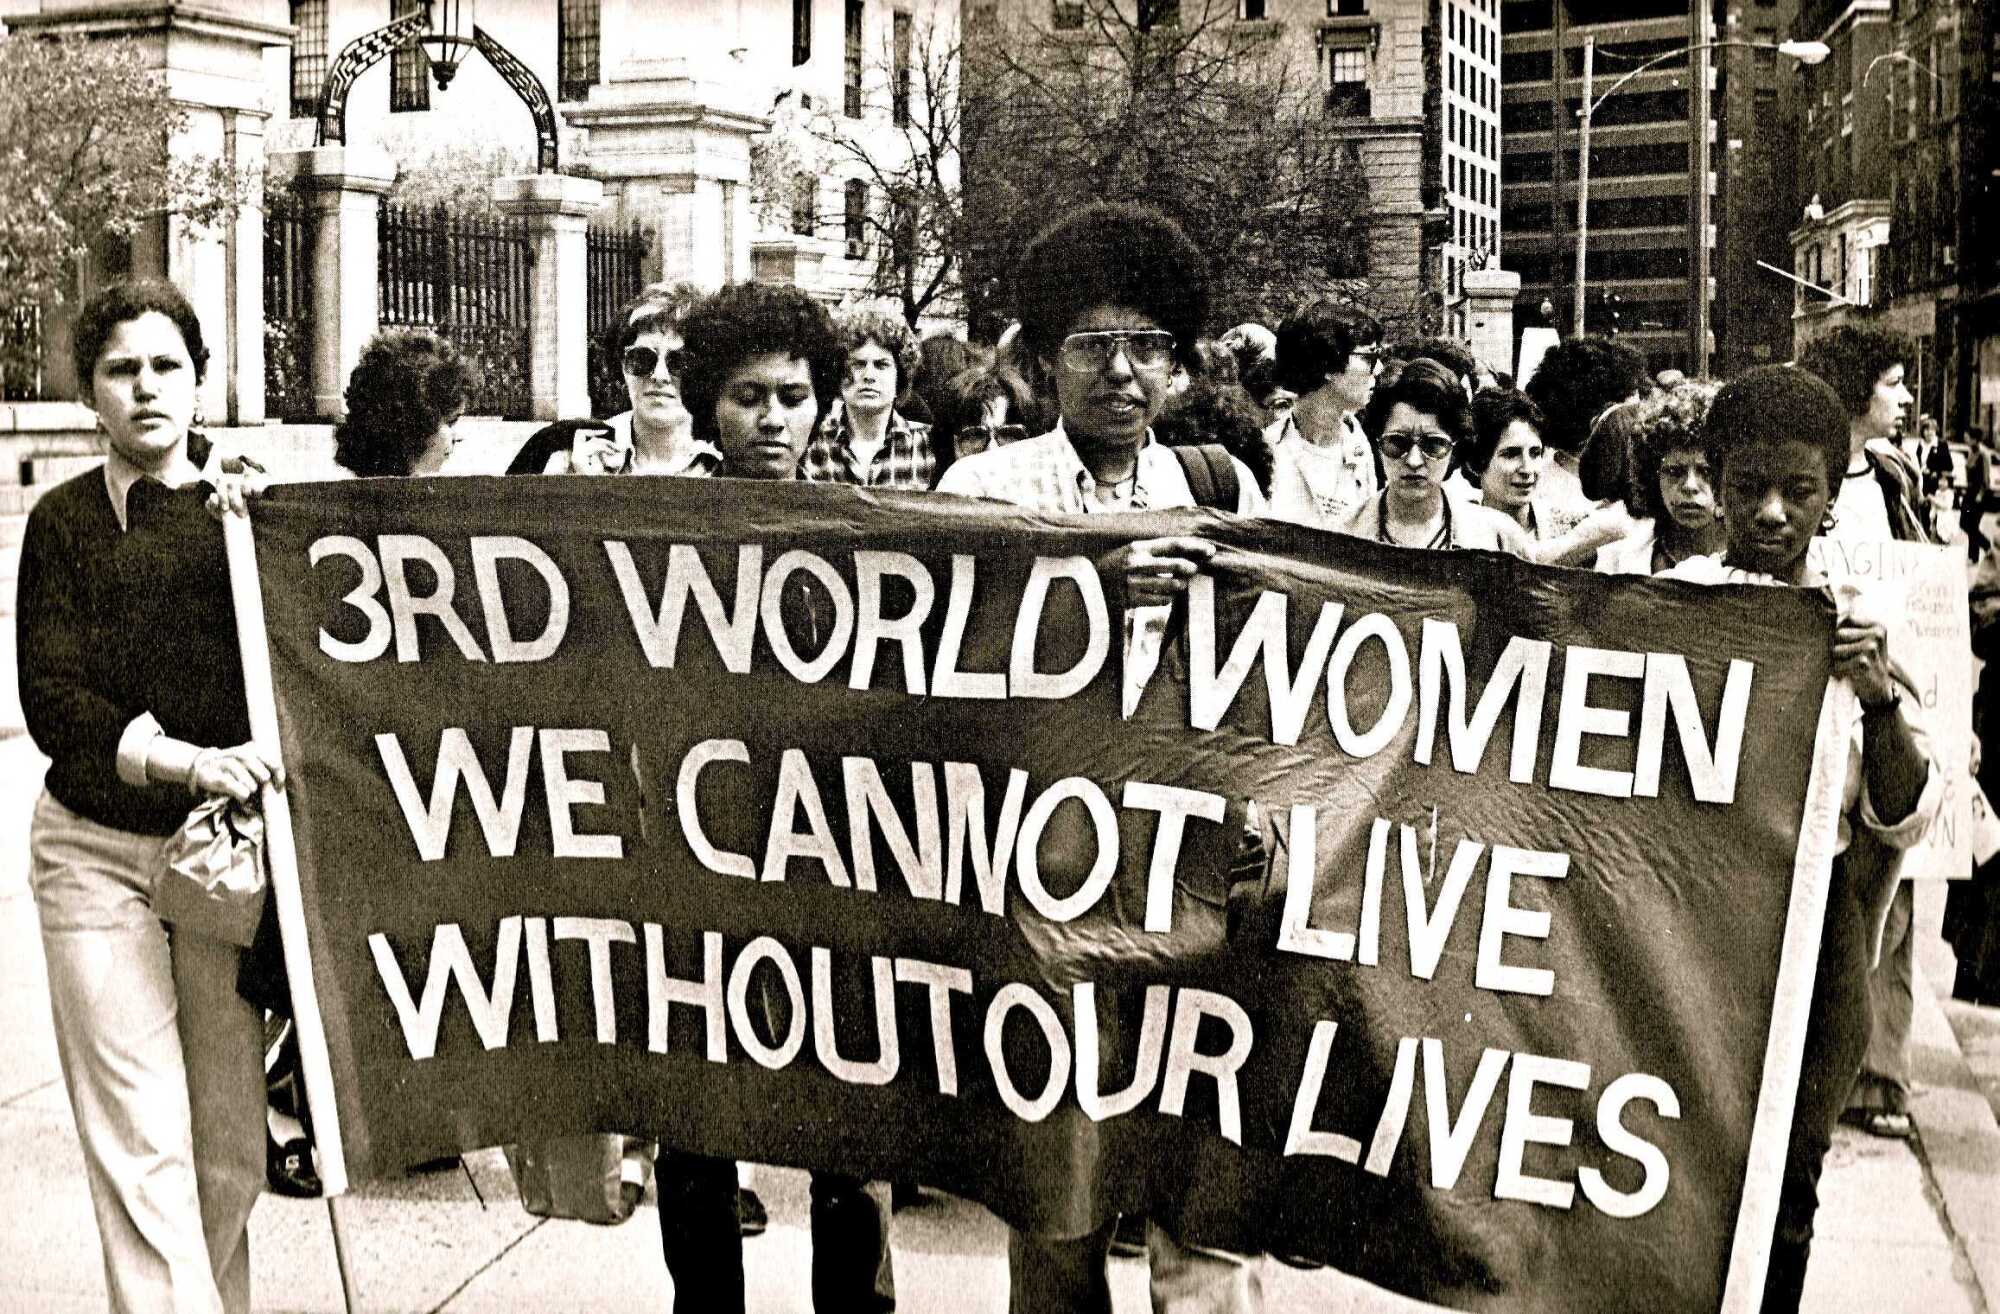 A group of women holds a protest placard in 1979.